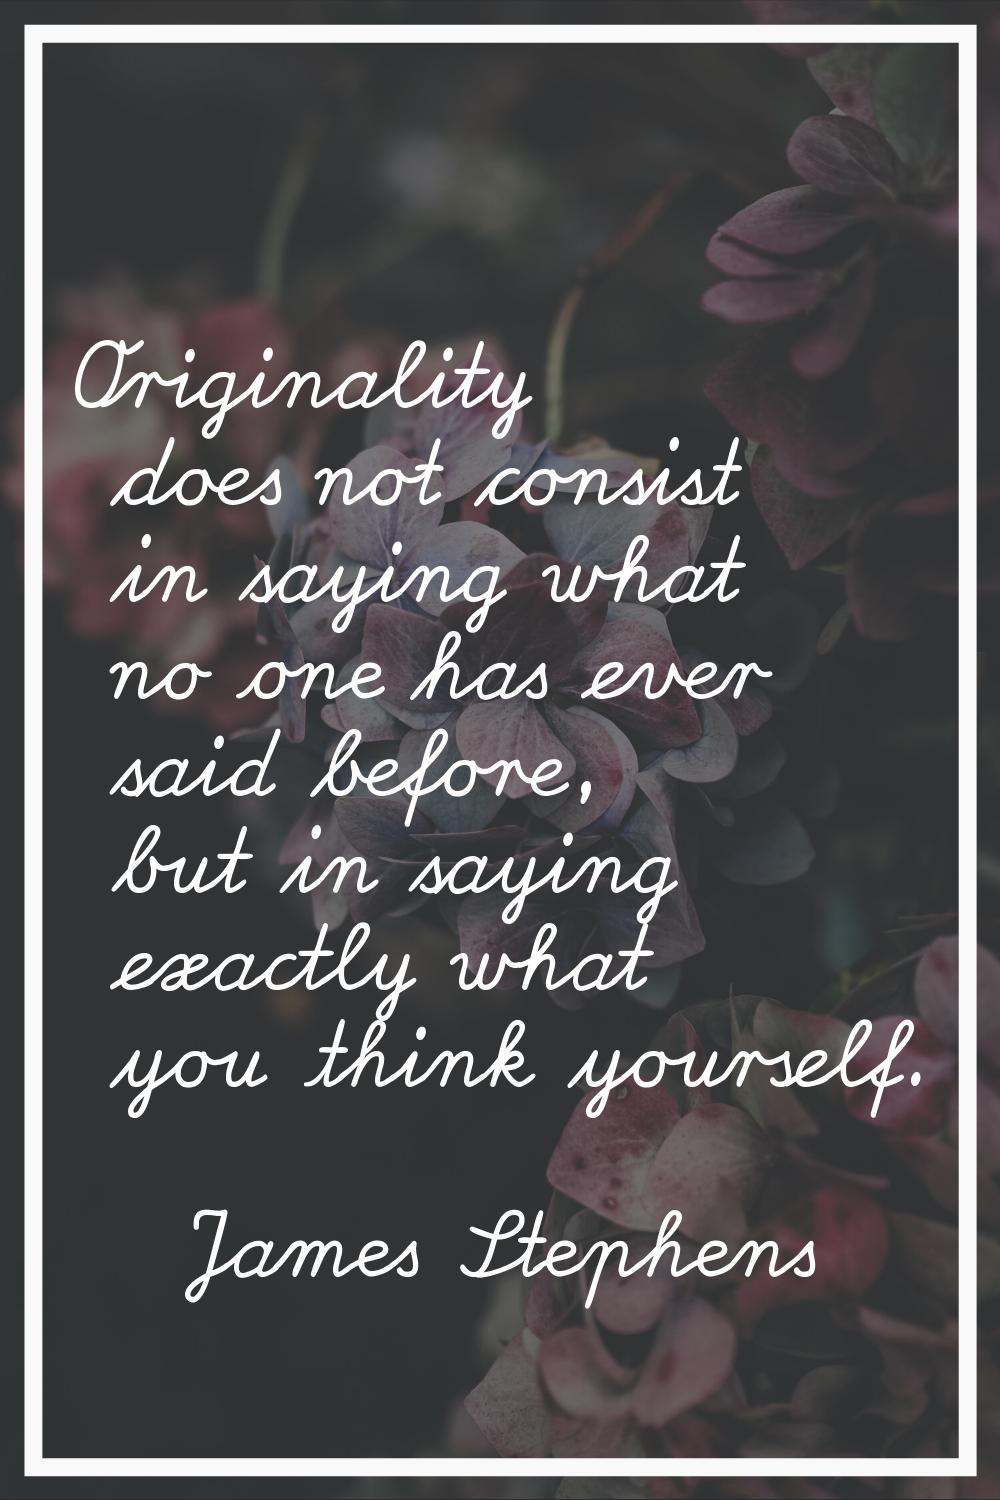 Originality does not consist in saying what no one has ever said before, but in saying exactly what